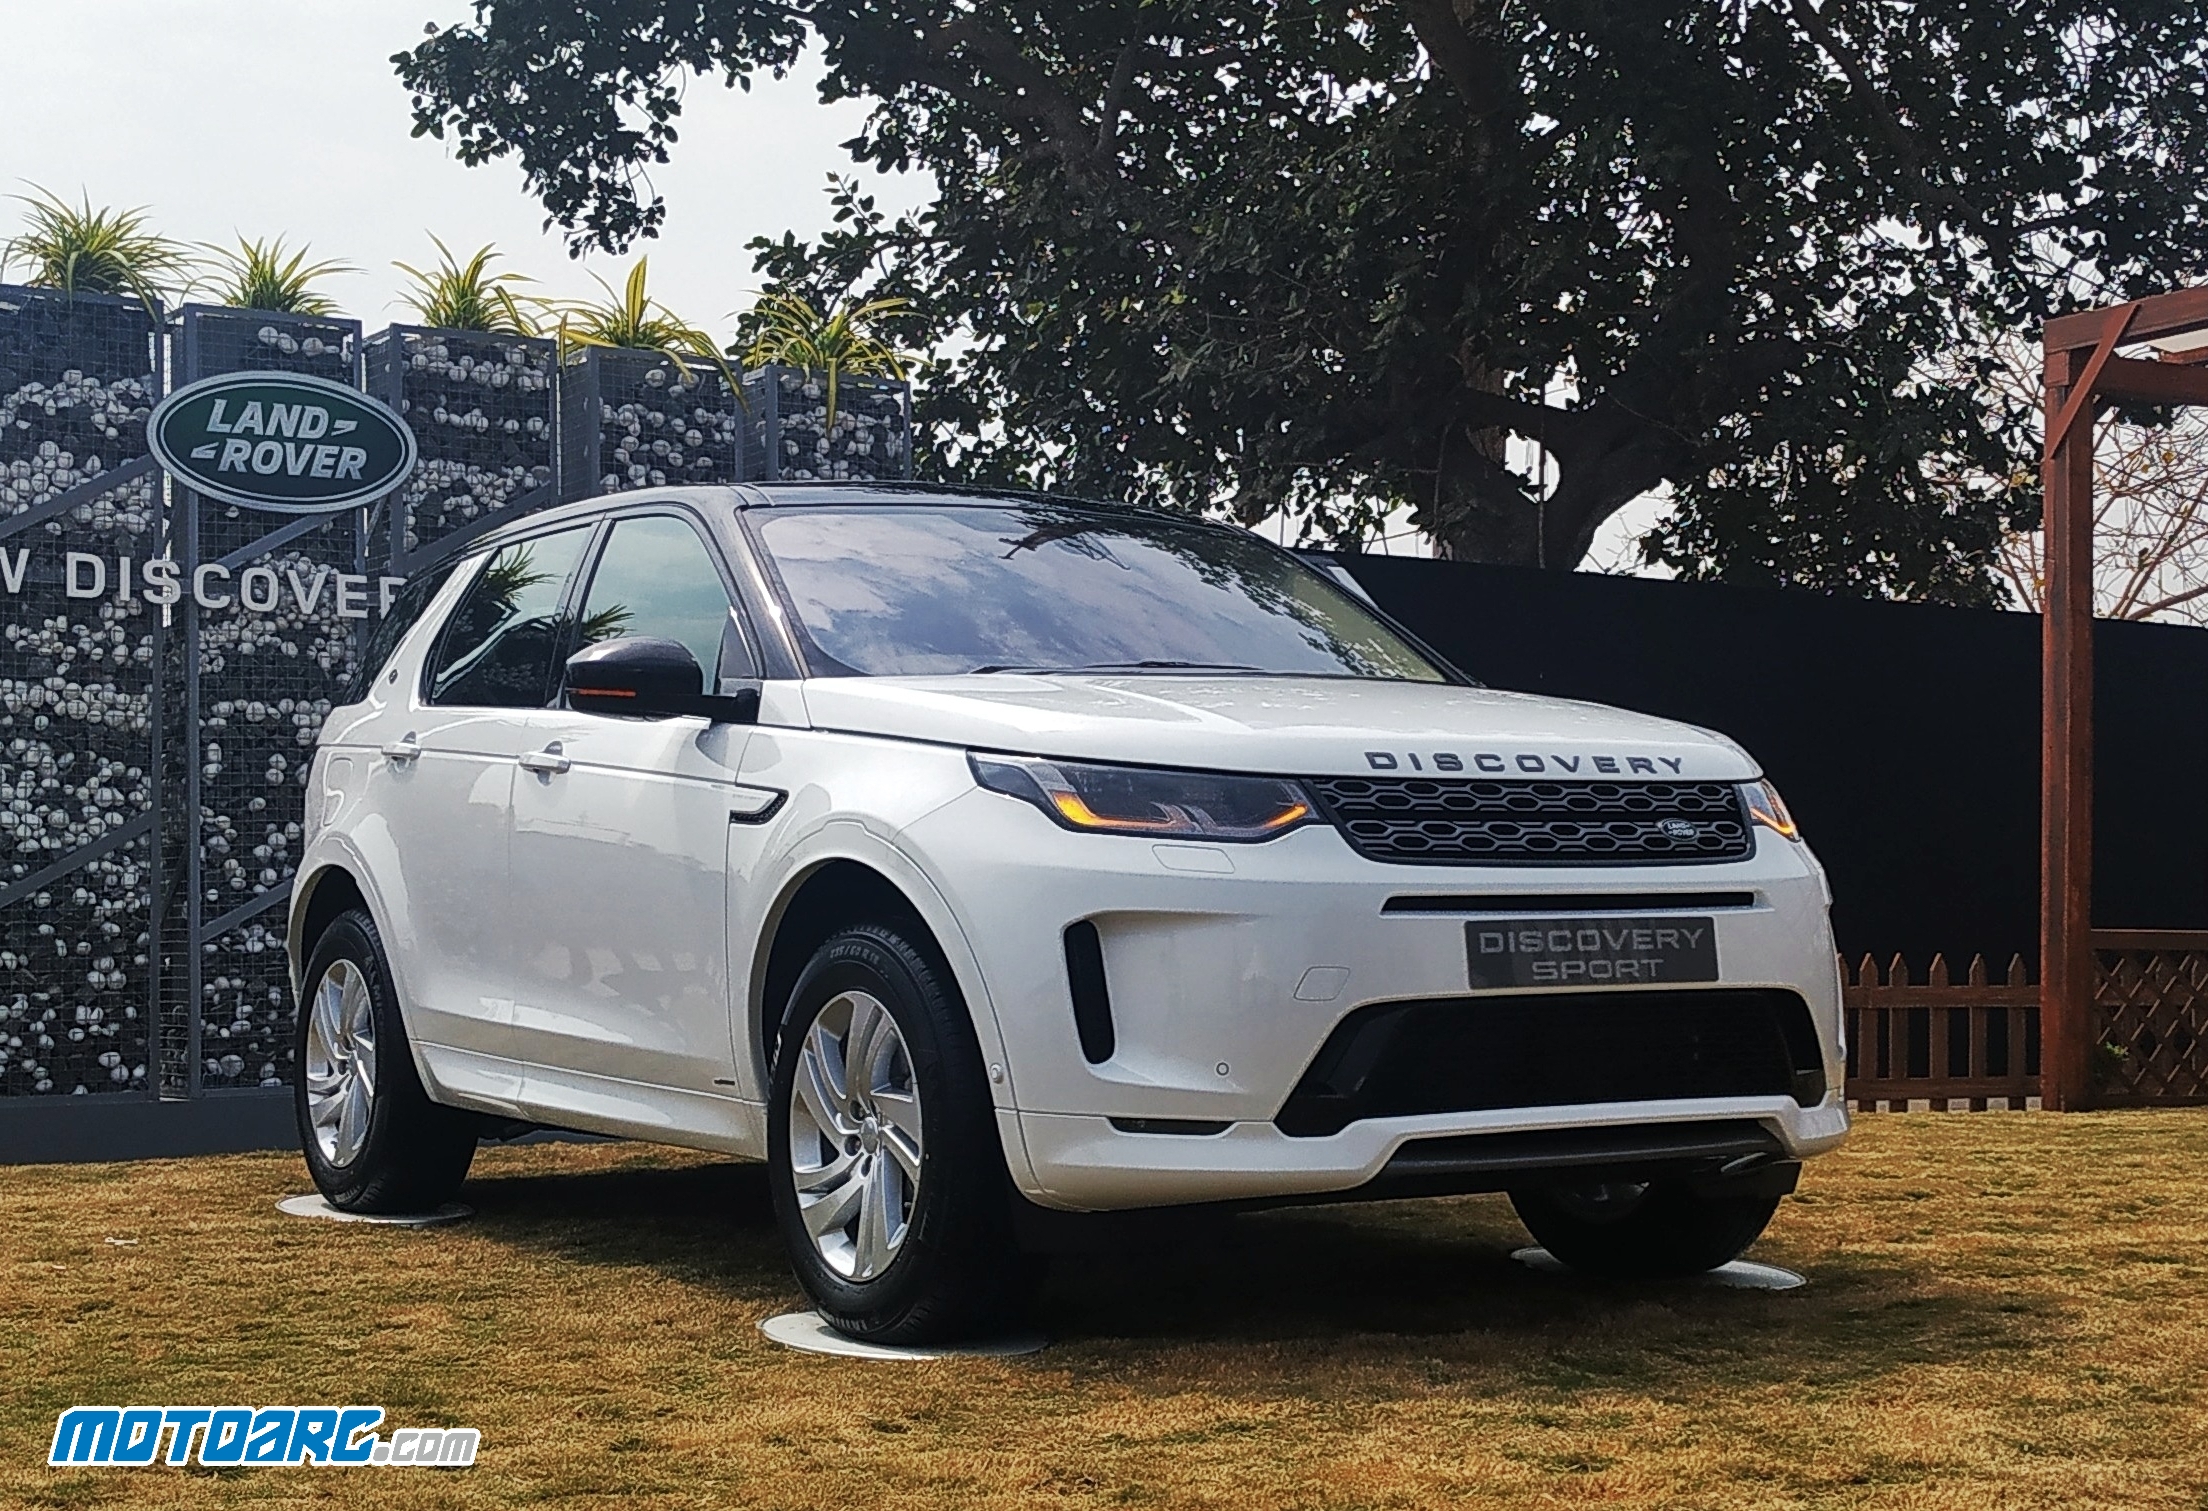 2020 Land Rover Discovery Sport Facelift launched at Rs 57.06 lakh